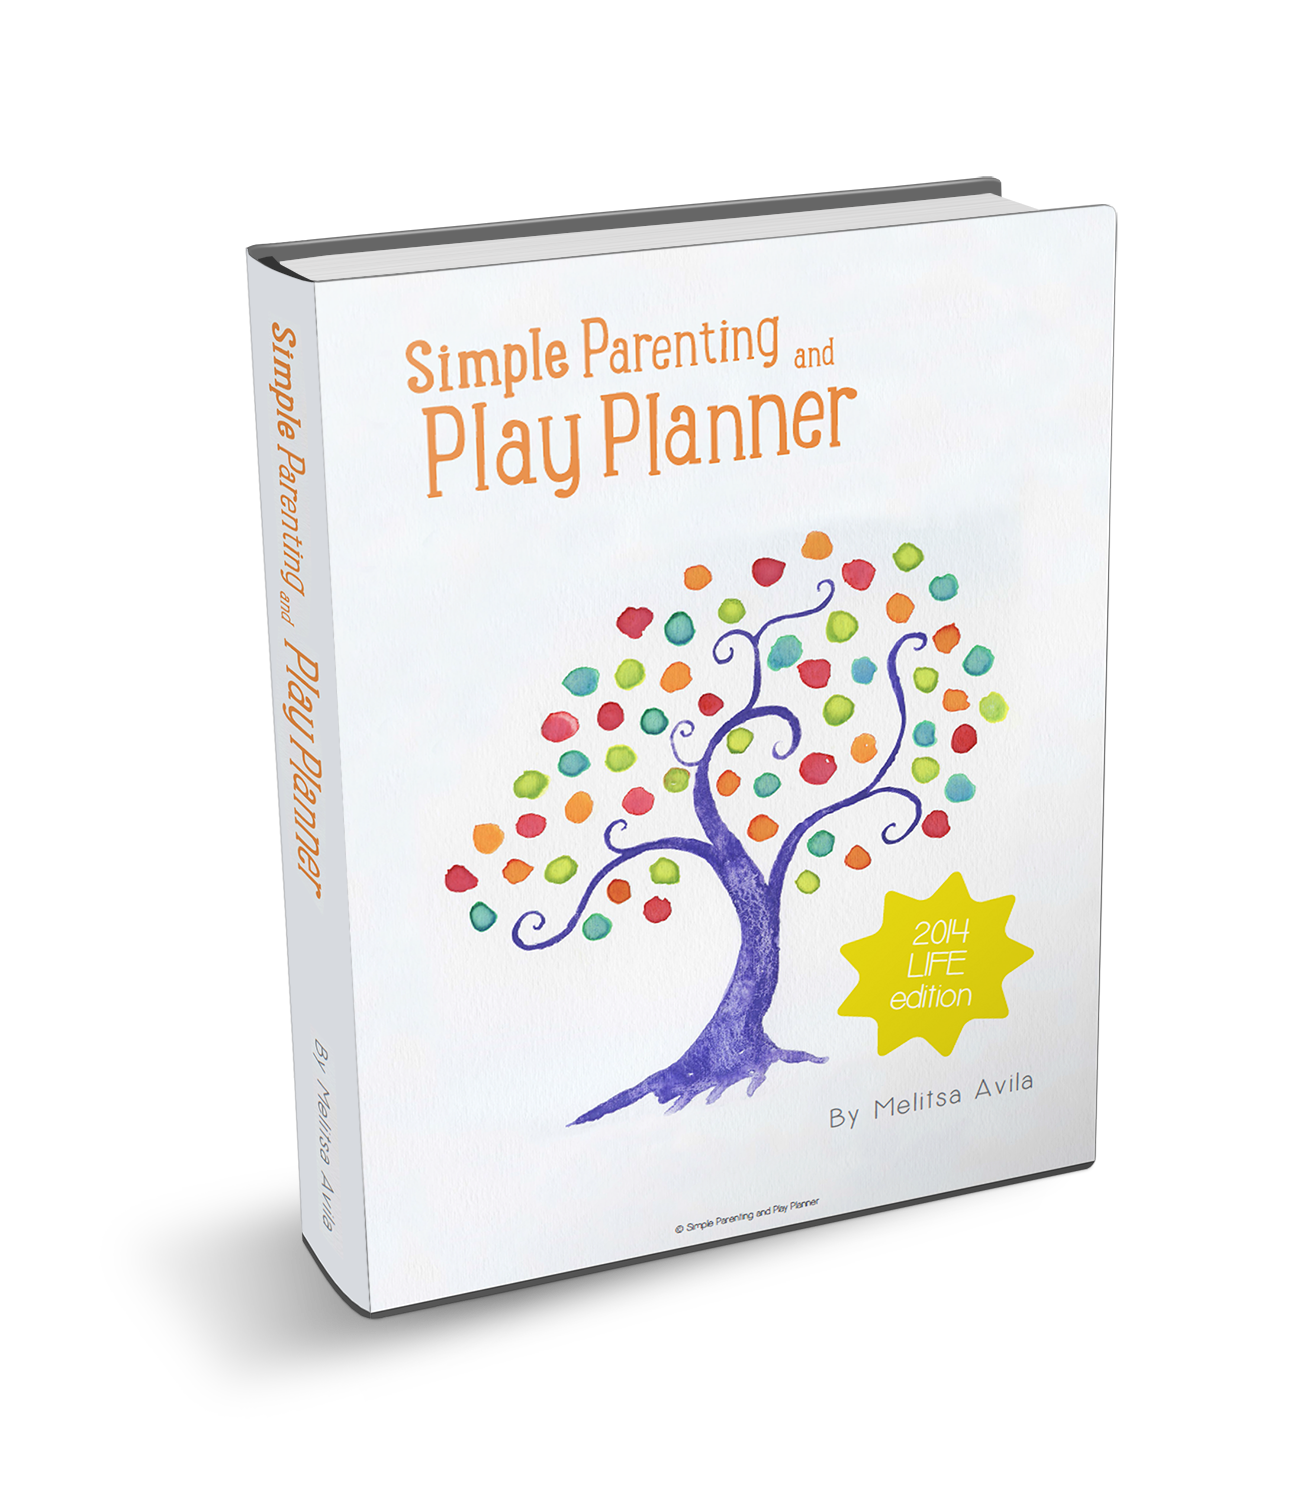 Simple Parenting and Play planner copy